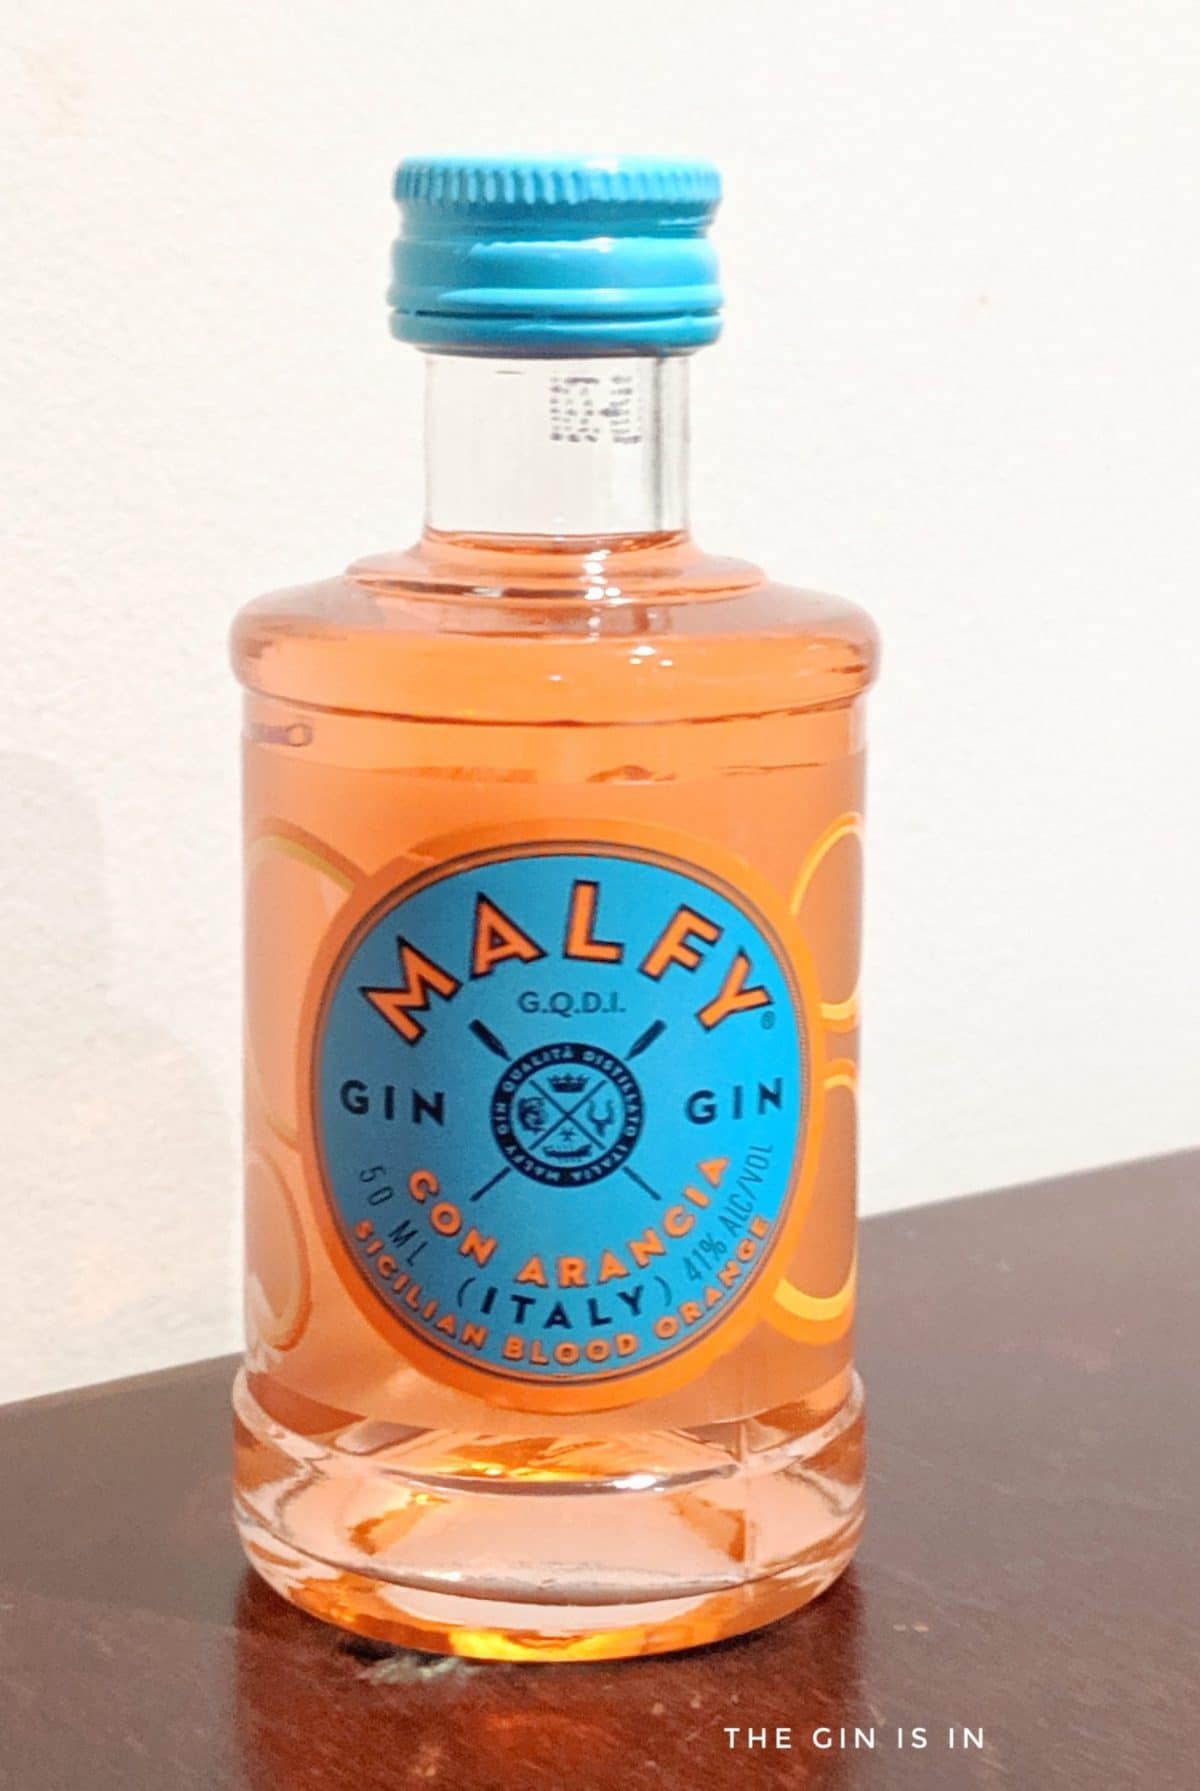 Con Gin Malfy | Notes Gin Tasting Review Arancia Expert and